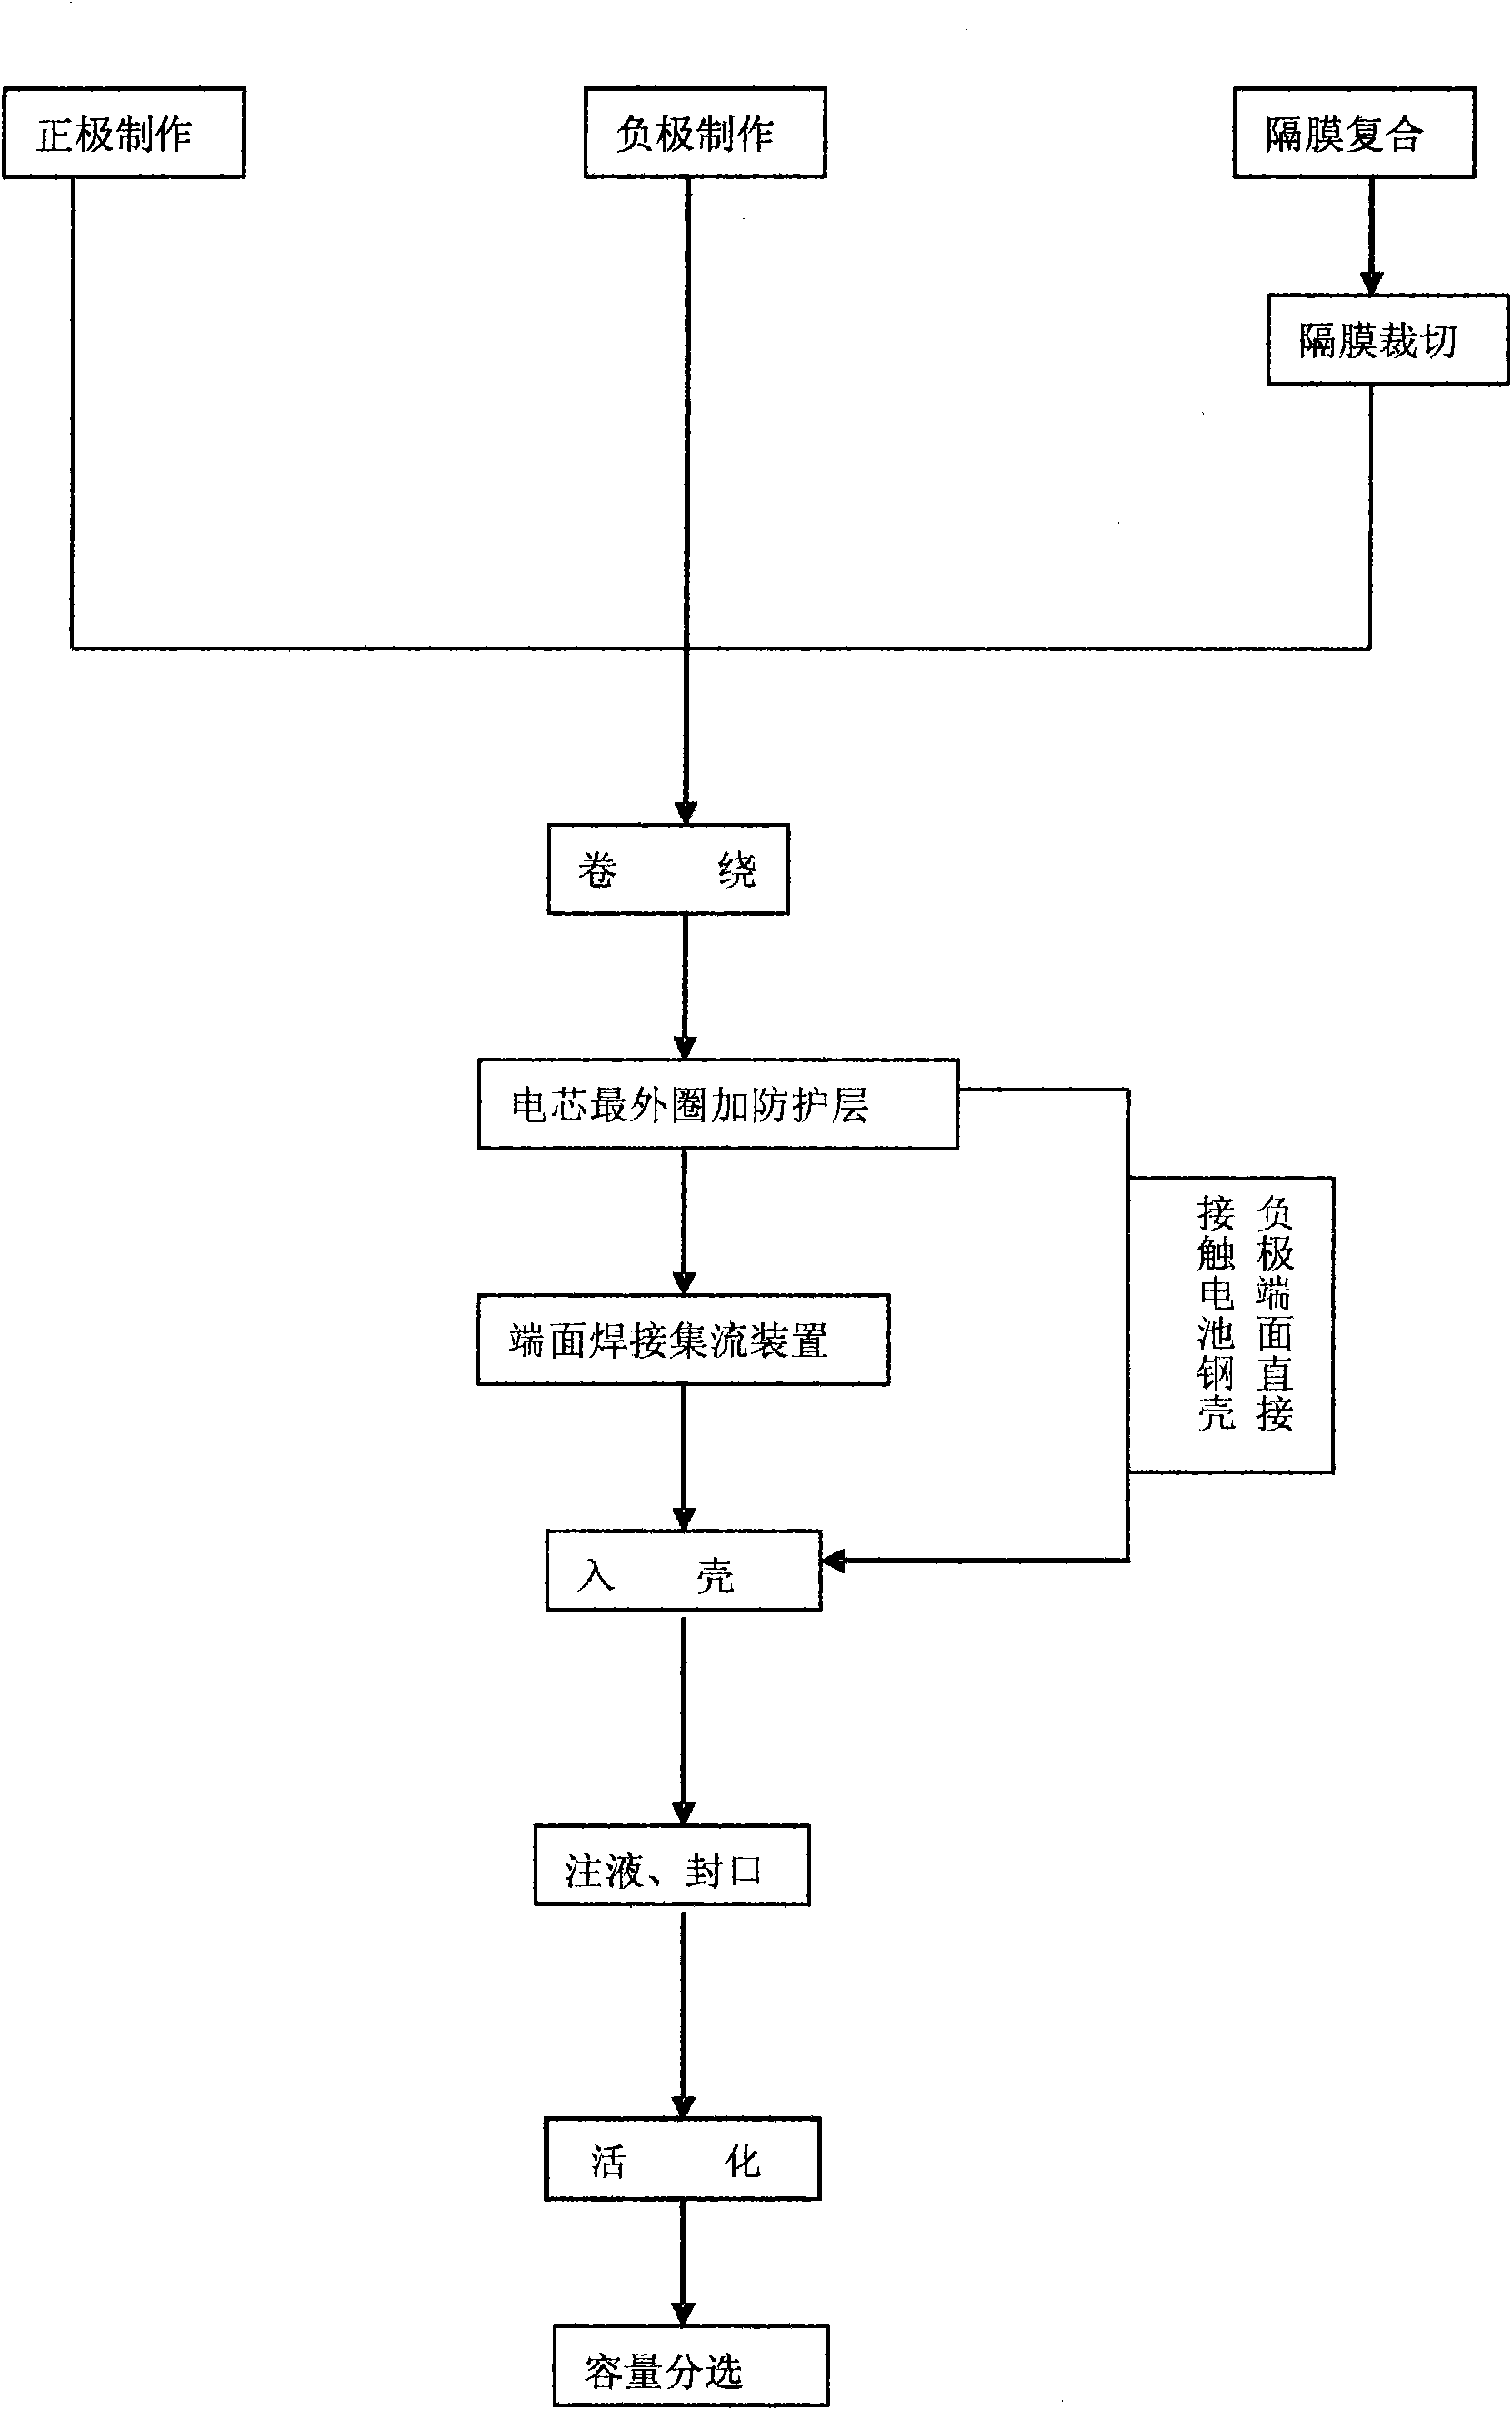 Cylindrical nickel-zinc cell and fabrication process thereof